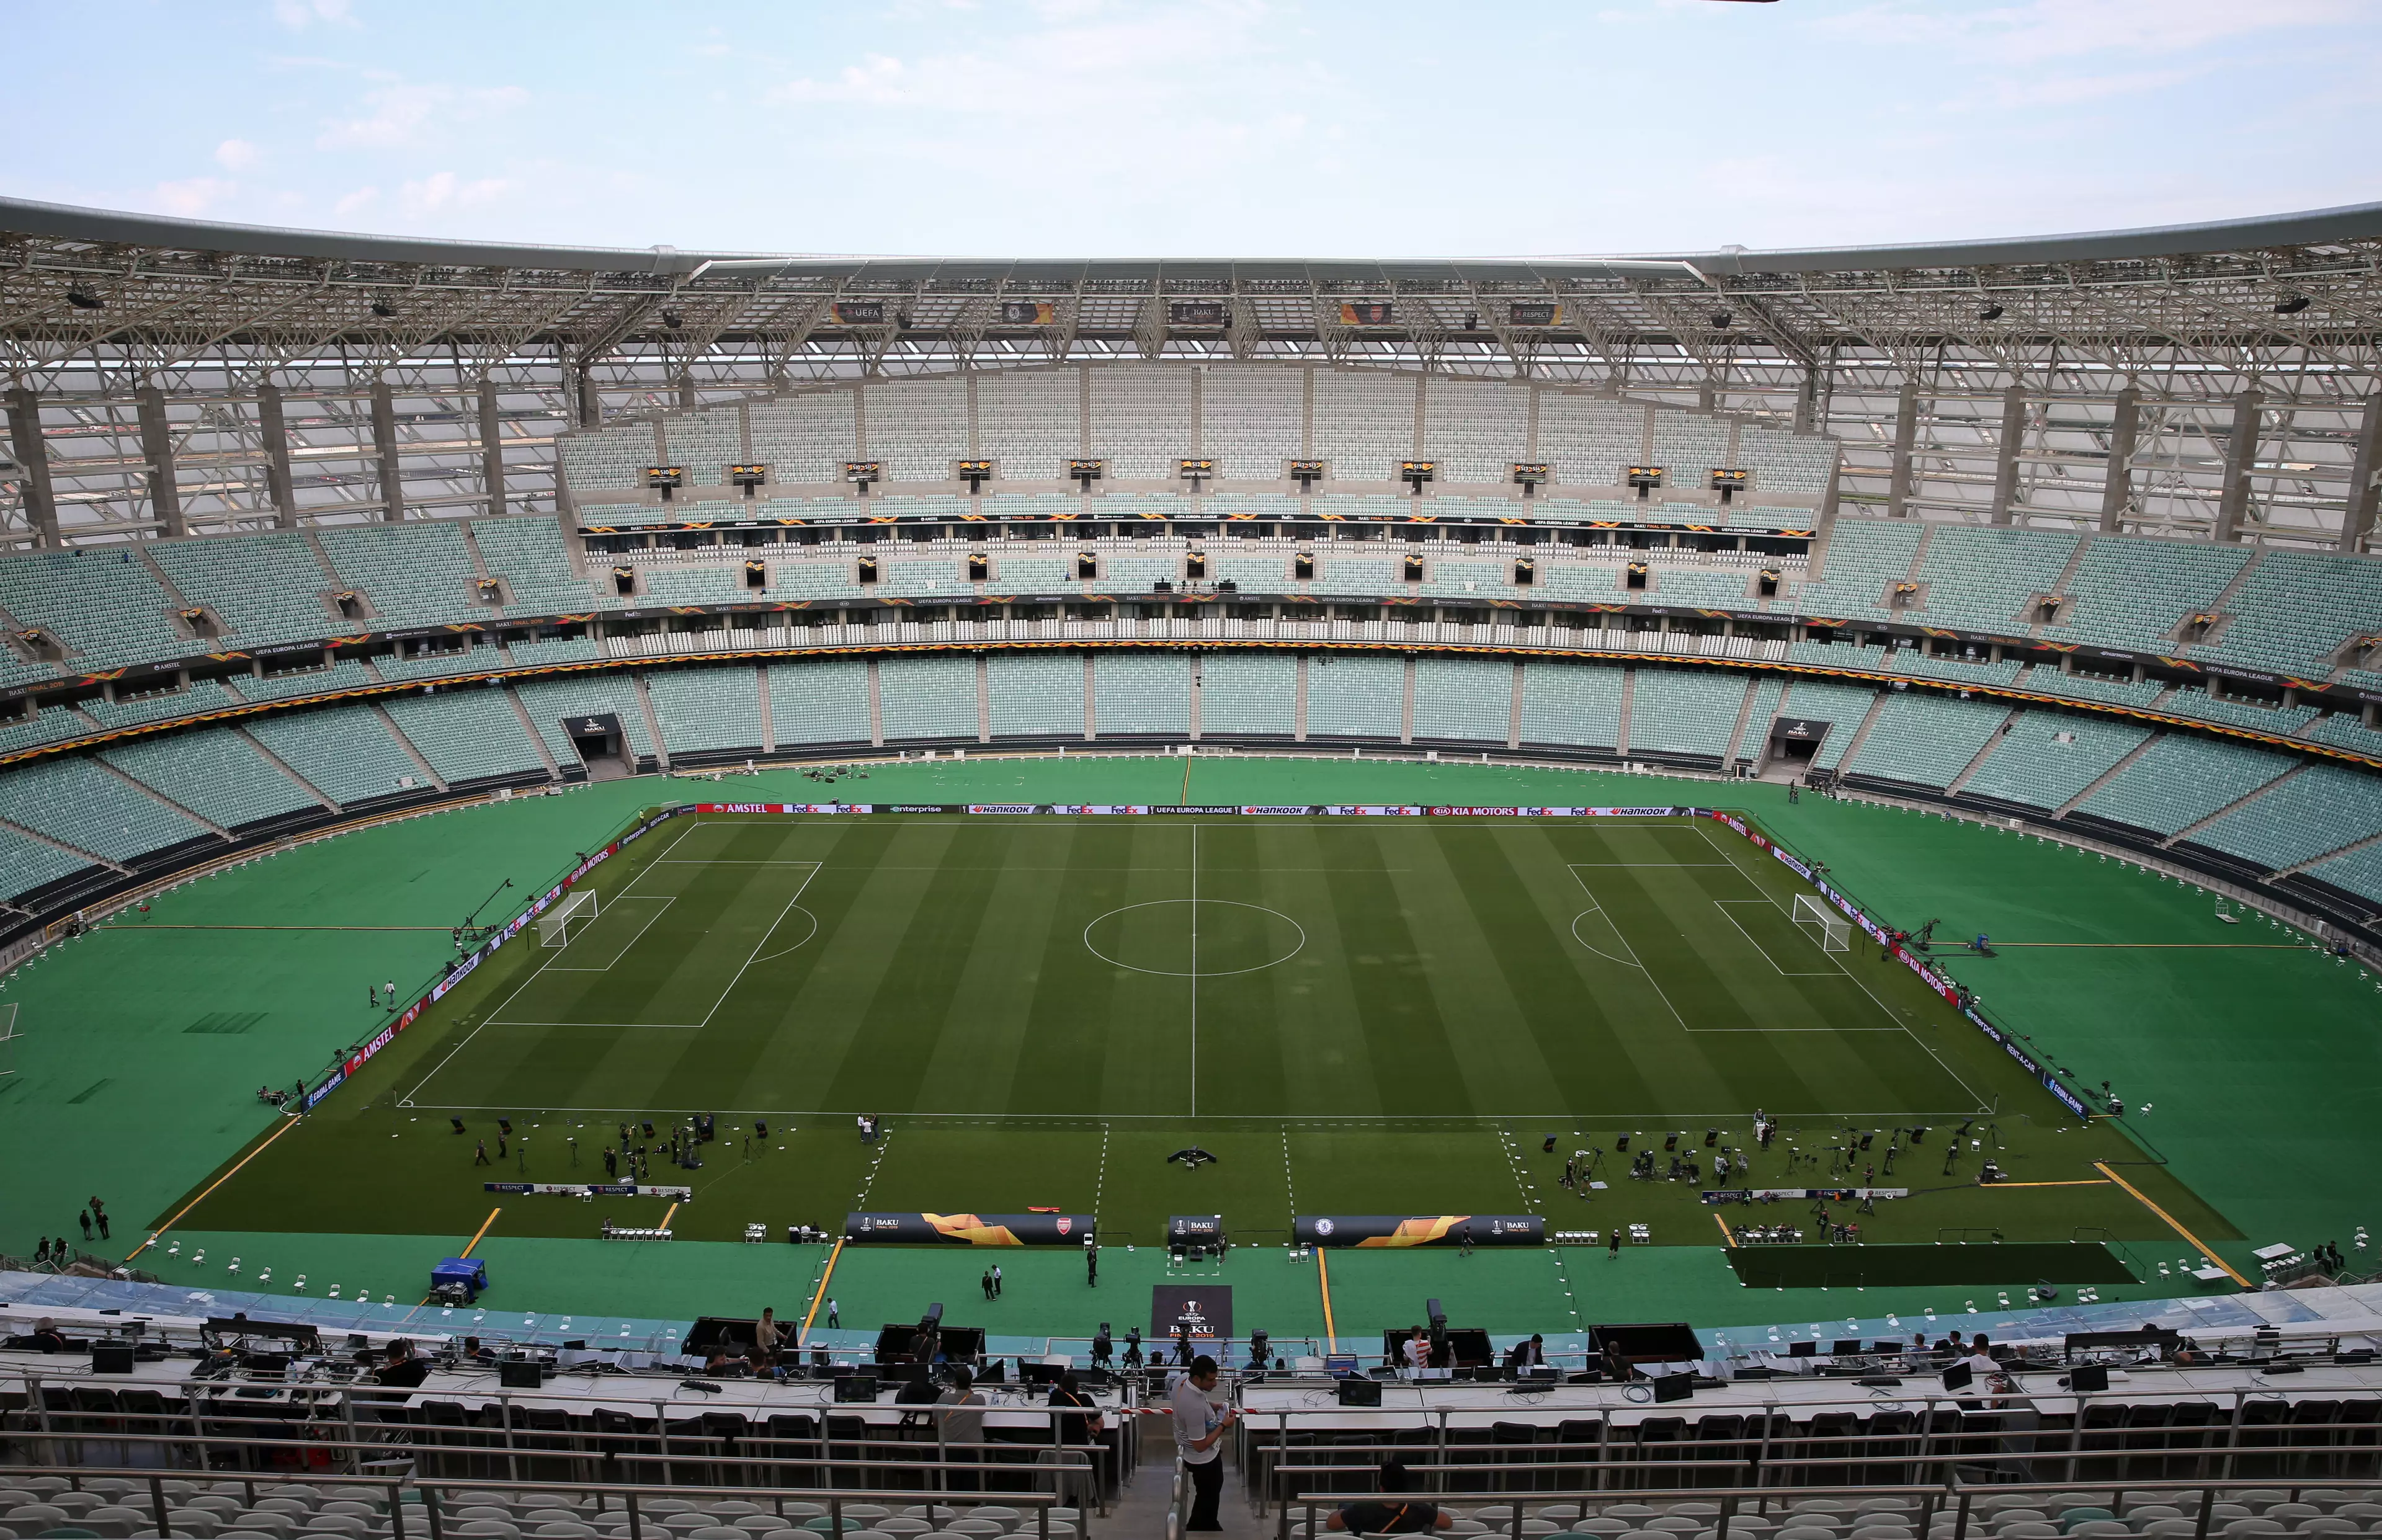 The Olympic stadium will be about this 'full' on Wednesday. Image: PA Images